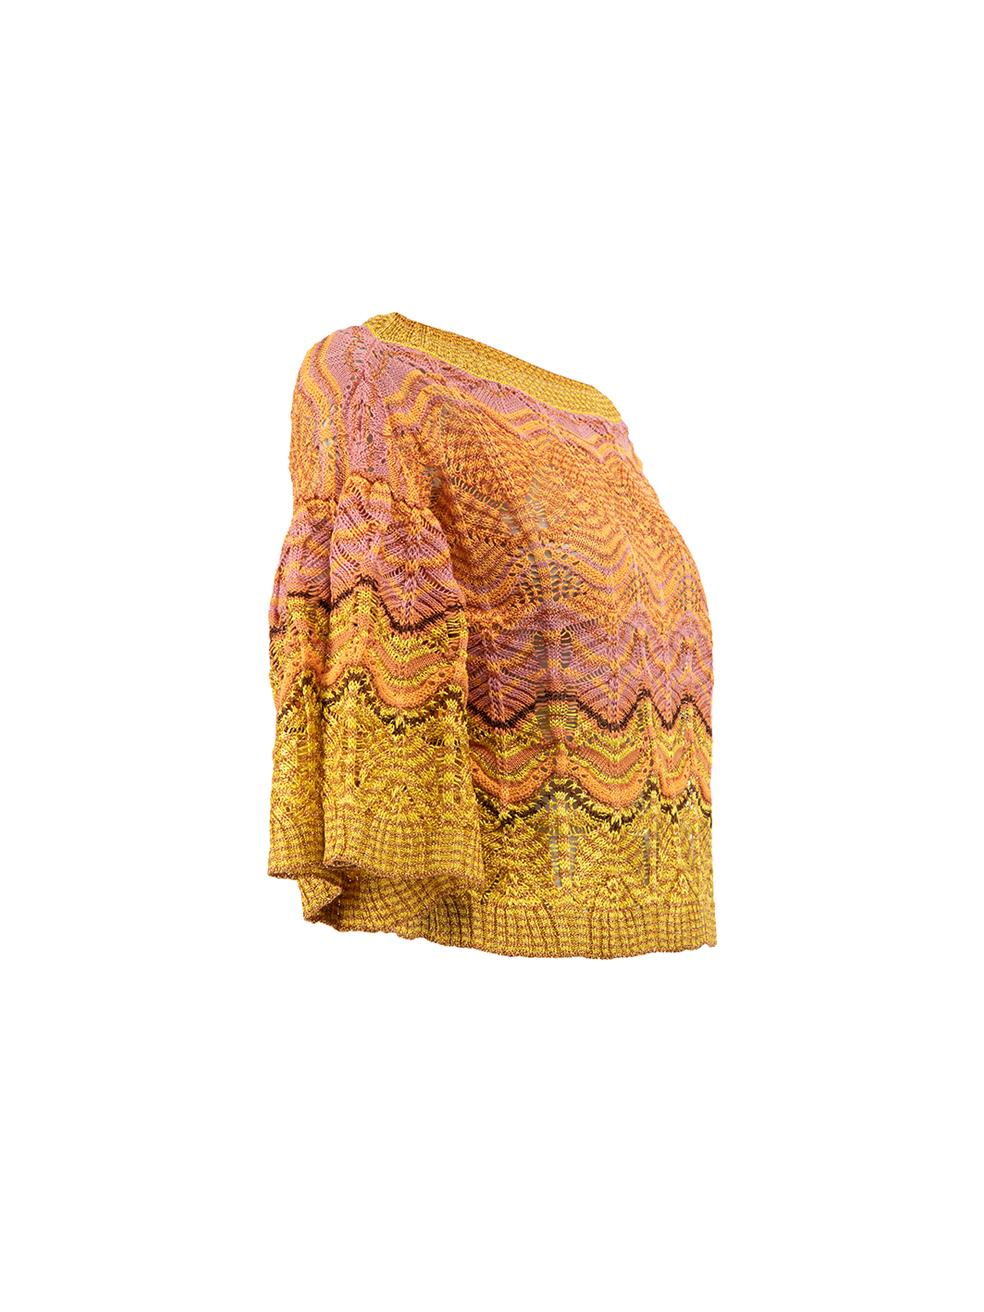 CONDITION is Never Worn. No visible wear to top is evident on this used Missoni designer resale item. Details Multicolour- Pink, orange and yellow Synthetic Crochet top Wide boat neckline Mid length flared sleeves Made in Italy Composition 31%